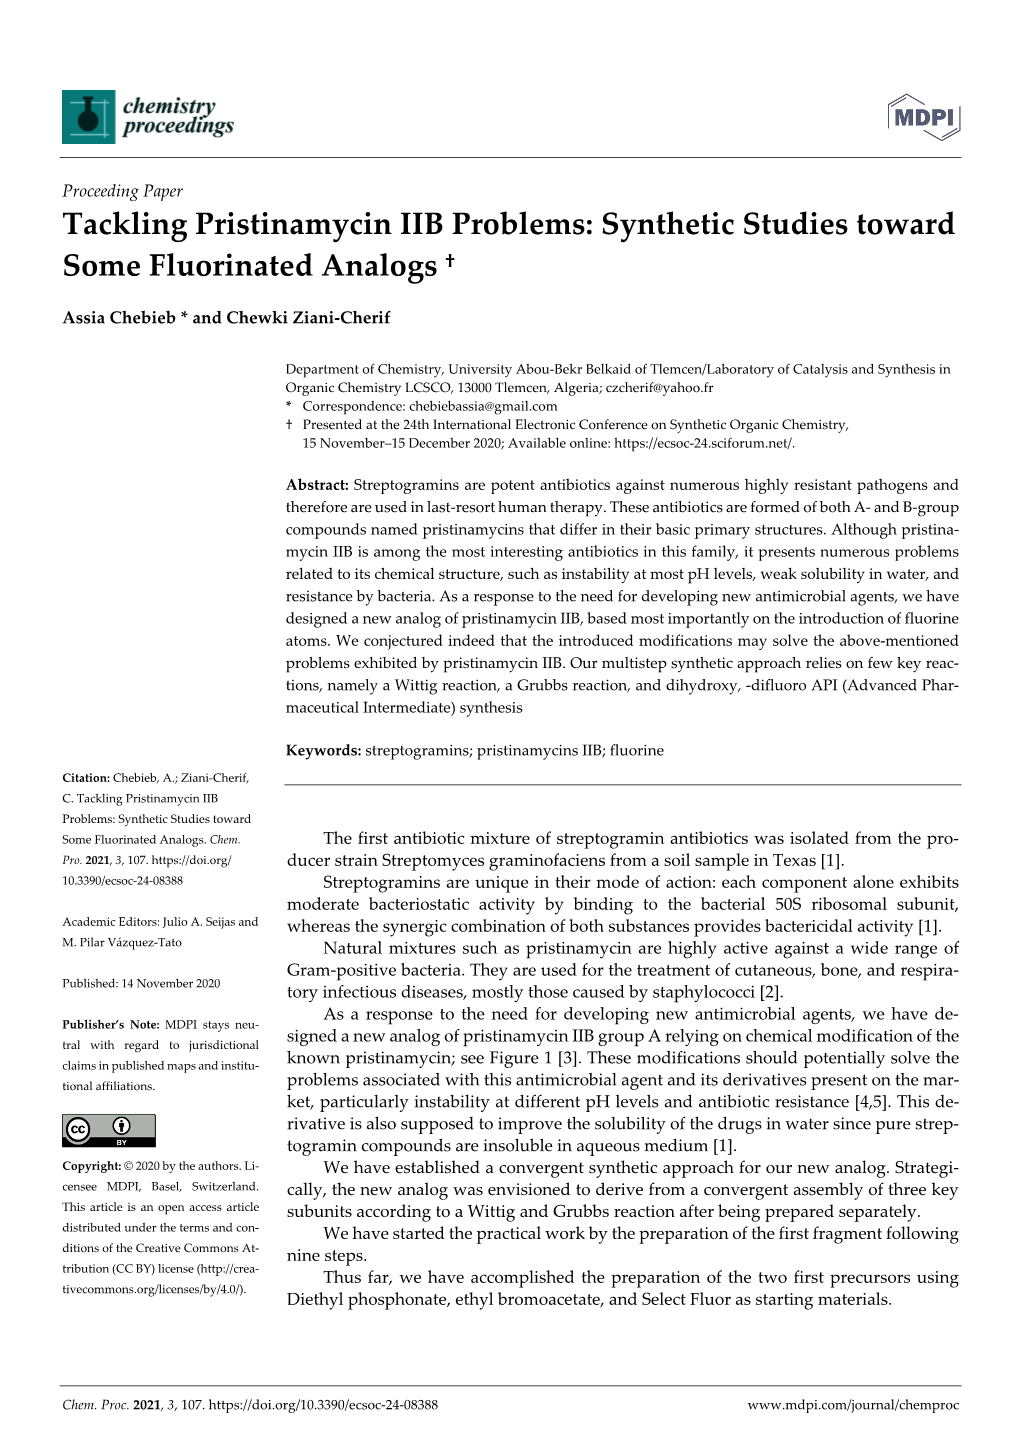 Tackling Pristinamycin IIB Problems: Synthetic Studies Toward Some Fluorinated Analogs †